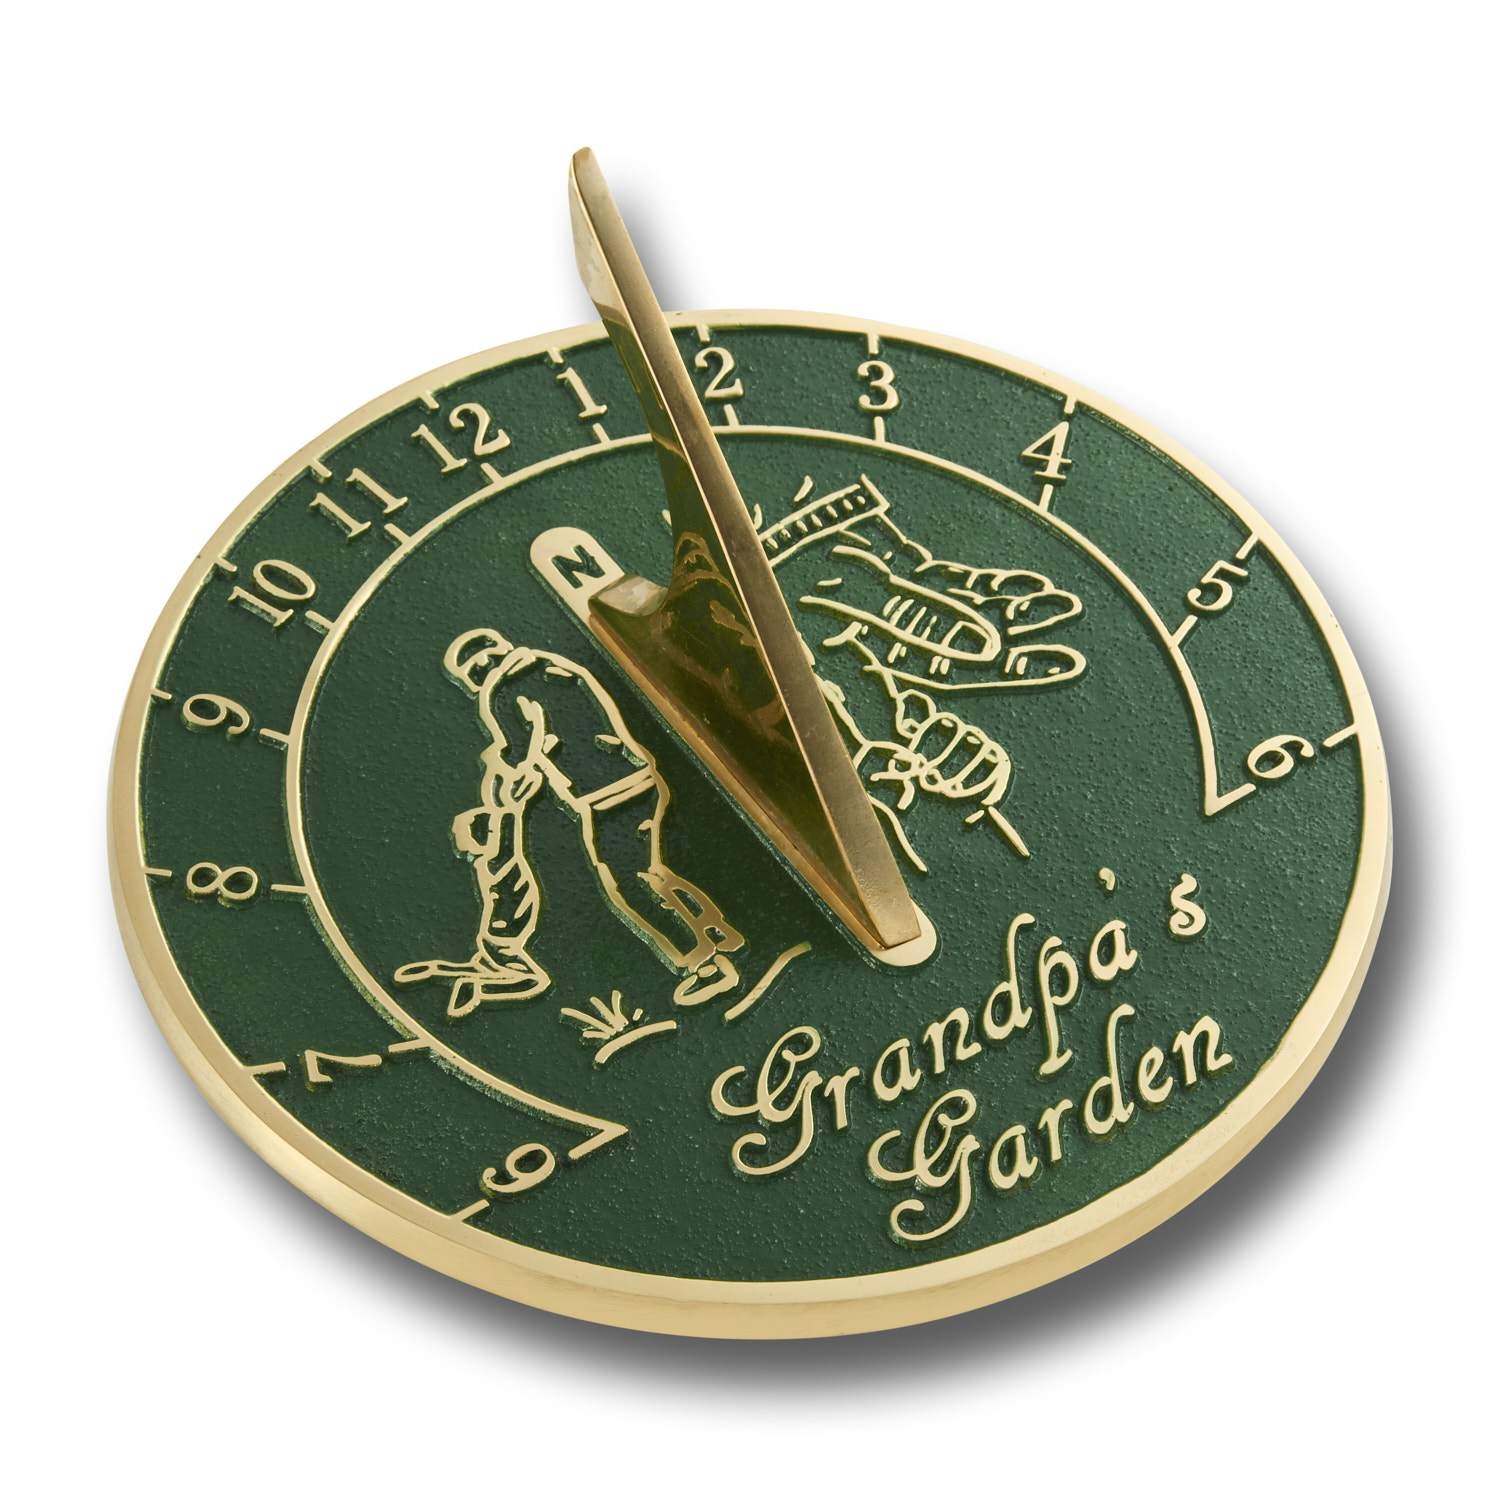 Grandpa’s Garden Sundial Gift. New Gift Idea For His Garden Or Ornament From Grandson, Granddaughter Or Grandkids. Lasting Card For Him On Fathers Day, Birthday Or Christmas